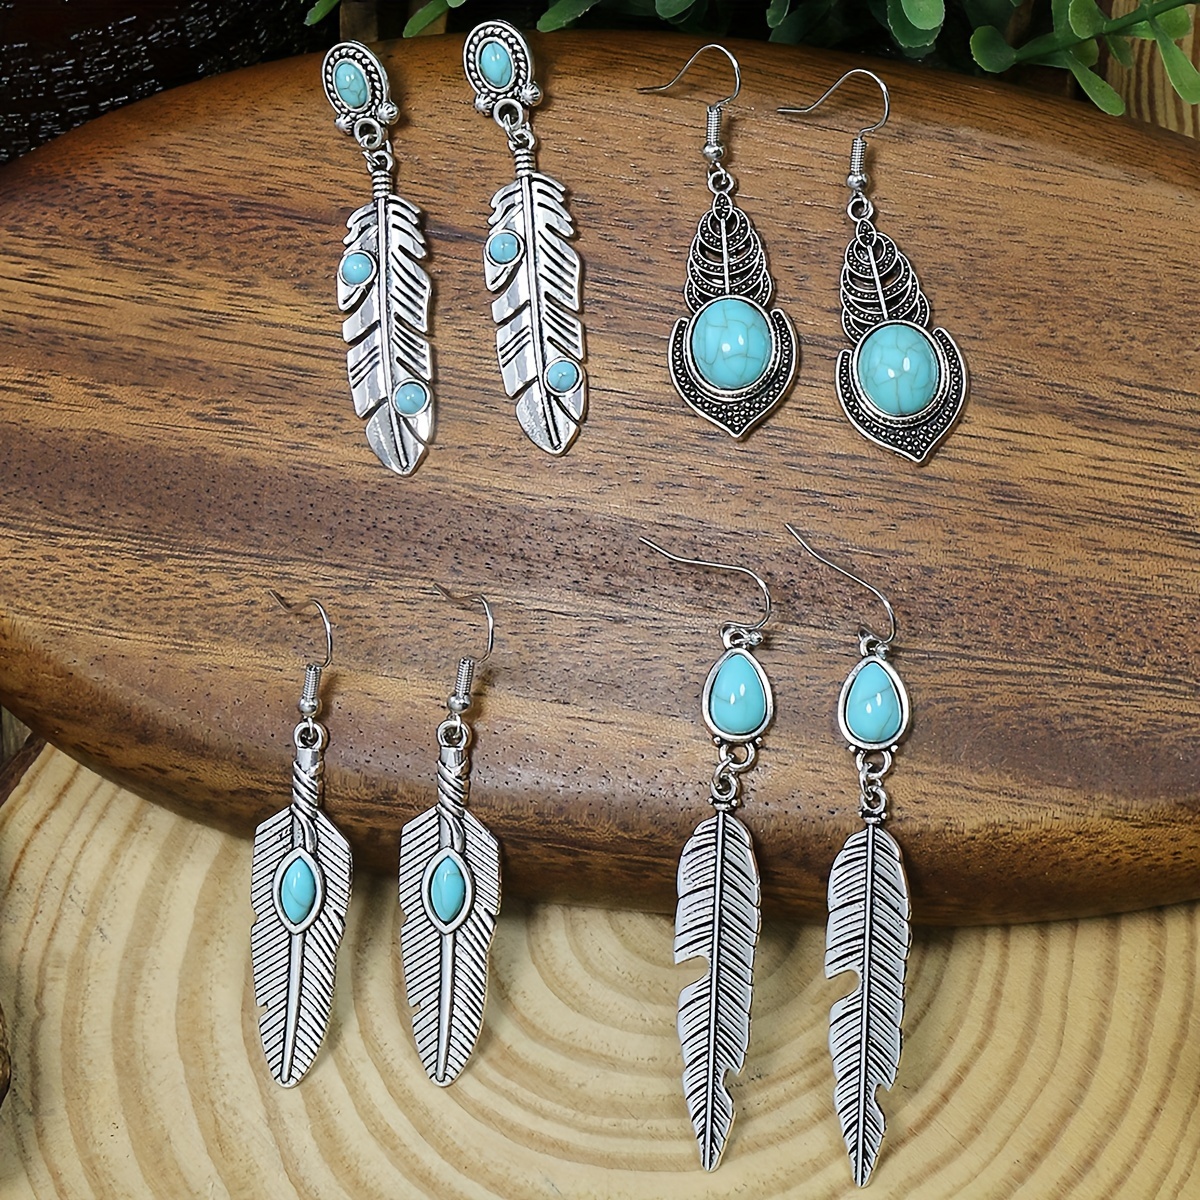 

4 Pairs Of Drop Earrings Retro Feather Design Match Daily Outfits Party Accessories Tribal Jewelry Casual Dating/ Commuting/ Work Decor